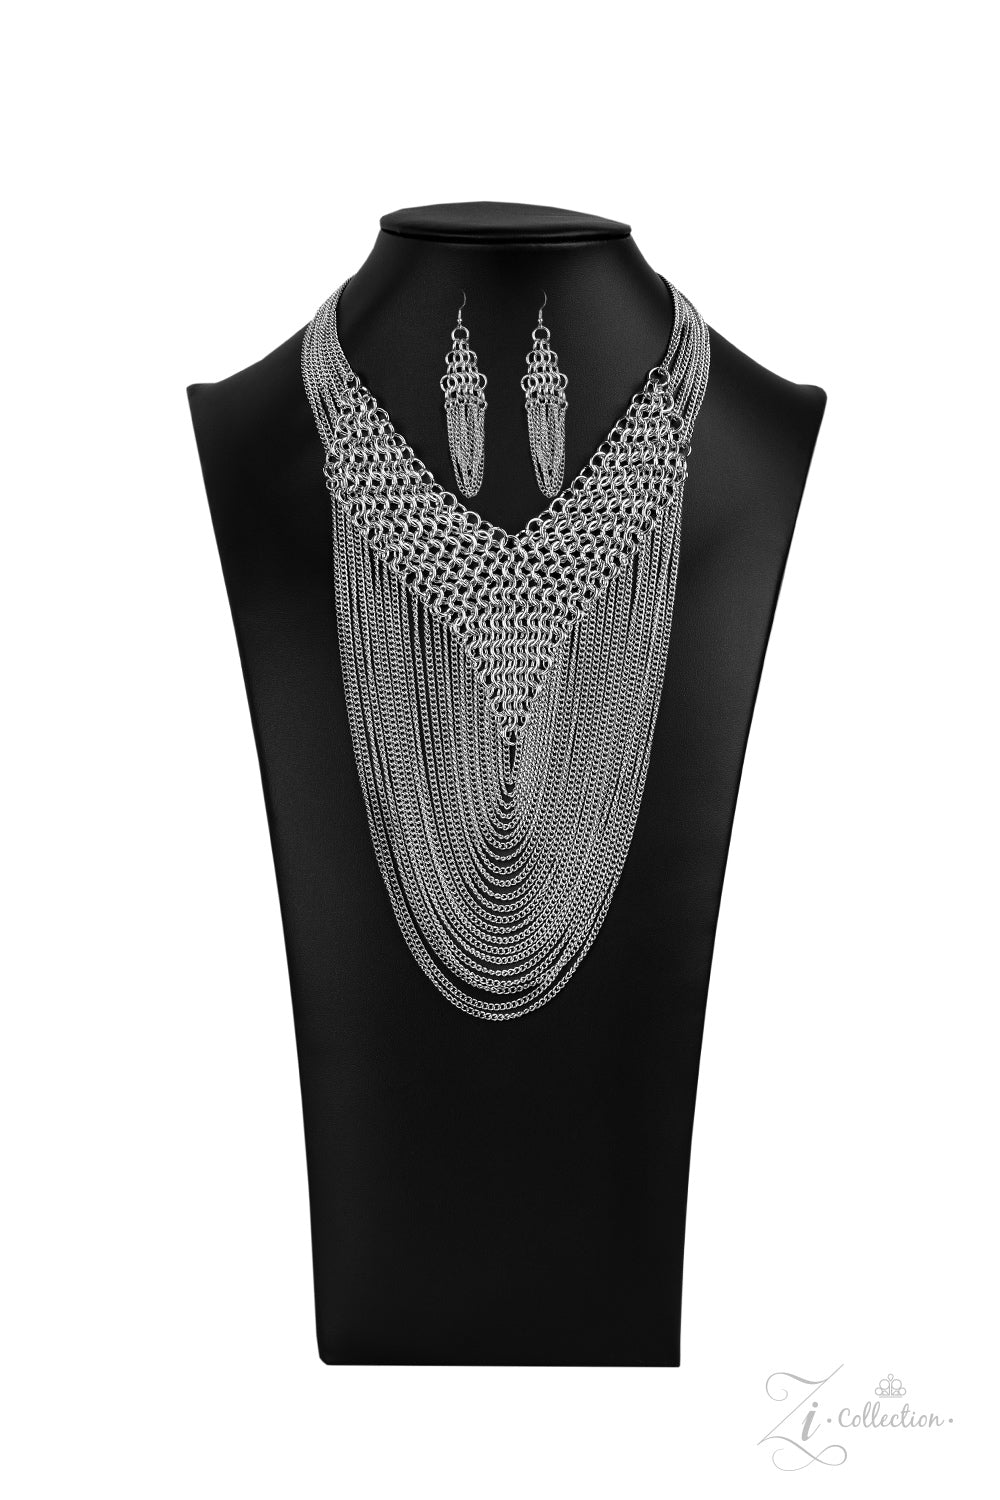 The Defiant
Zi Collection Necklace - Daria's Blings N Things